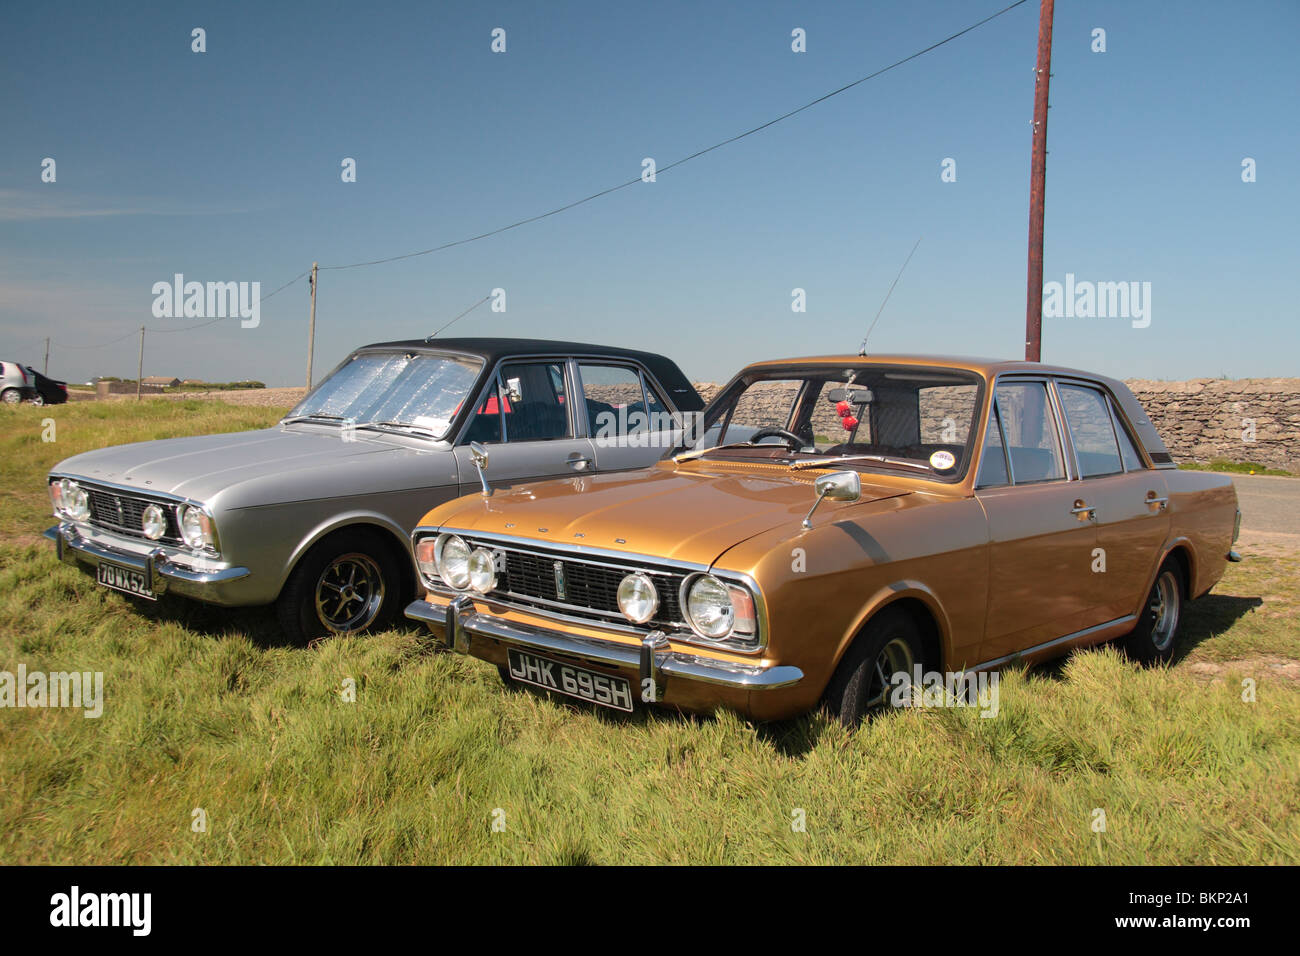 https://c8.alamy.com/comp/BKP2A1/two-4-door-ford-cortina-mark-ii-classic-cars-parked-close-to-the-hook-BKP2A1.jpg